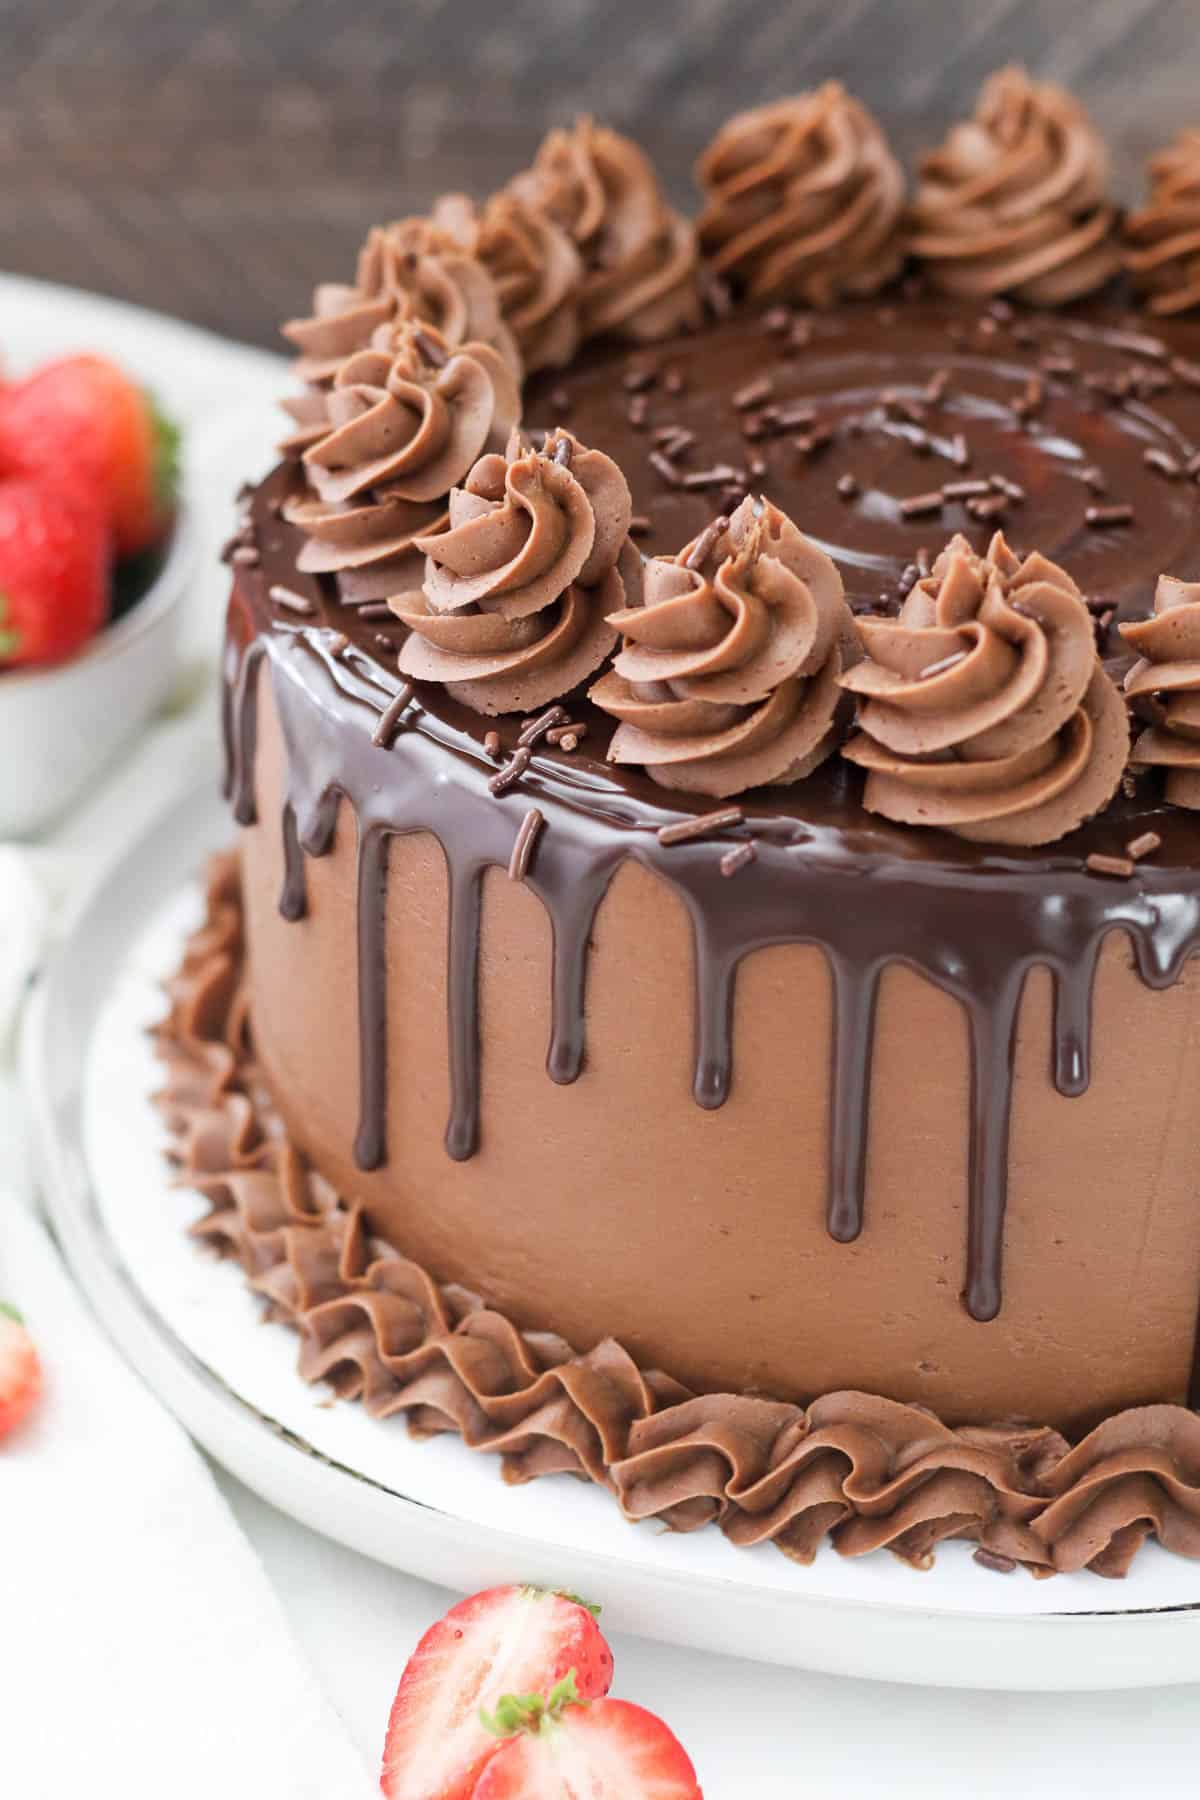 3 Best Cake Shops in Nagpur, MH - ThreeBestRated